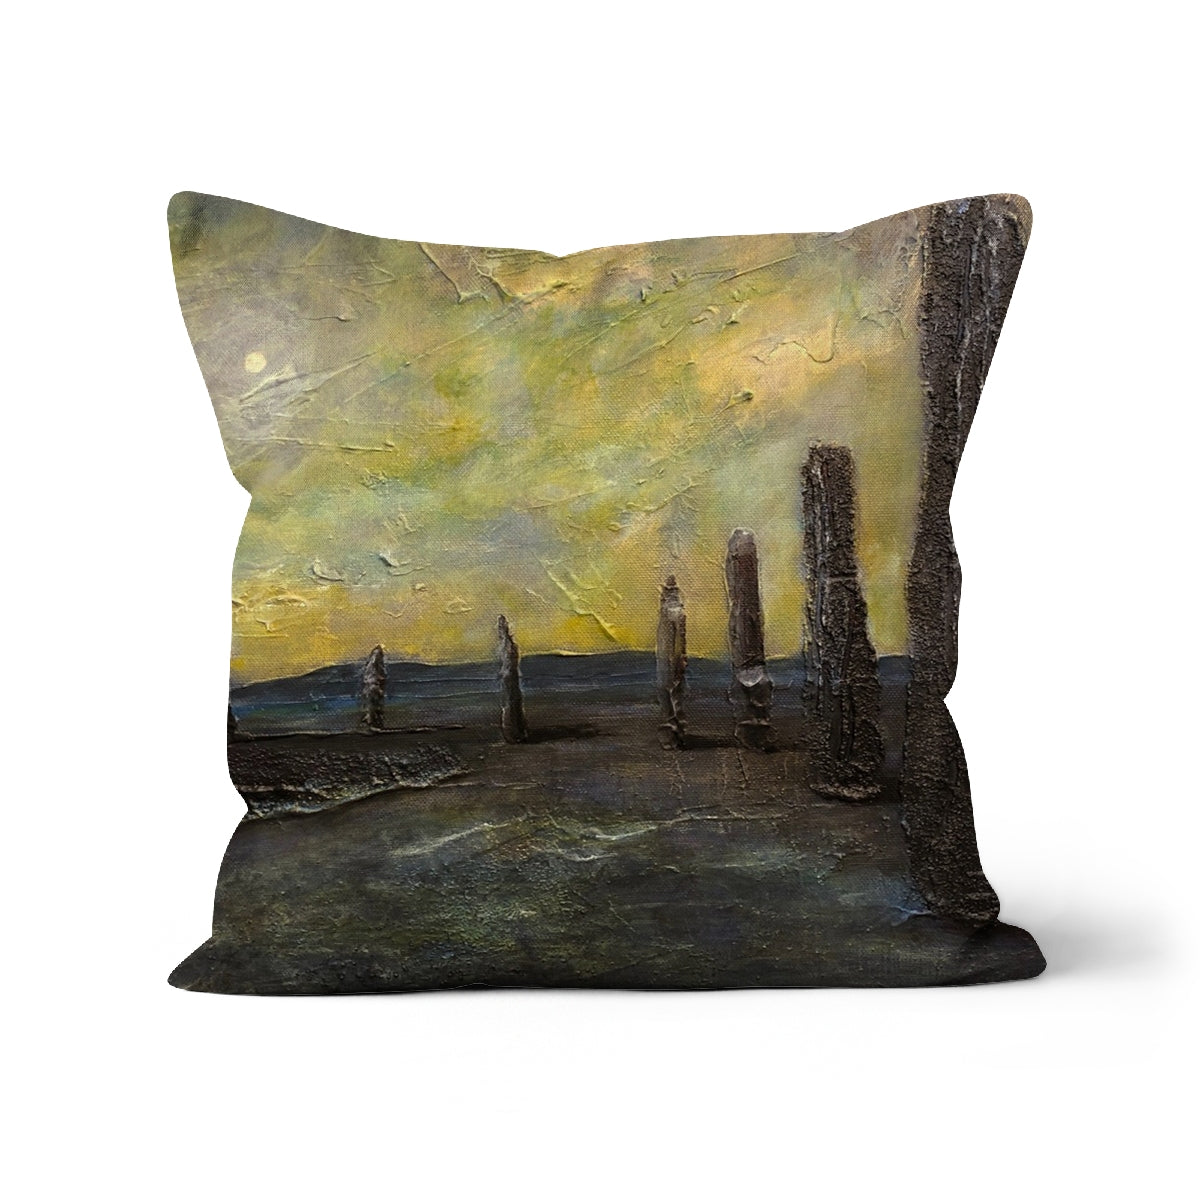 An Ethereal Ring Of Brodgar Art Gifts Cushion-Cushions-Orkney Art Gallery-Canvas-24"x24"-Paintings, Prints, Homeware, Art Gifts From Scotland By Scottish Artist Kevin Hunter